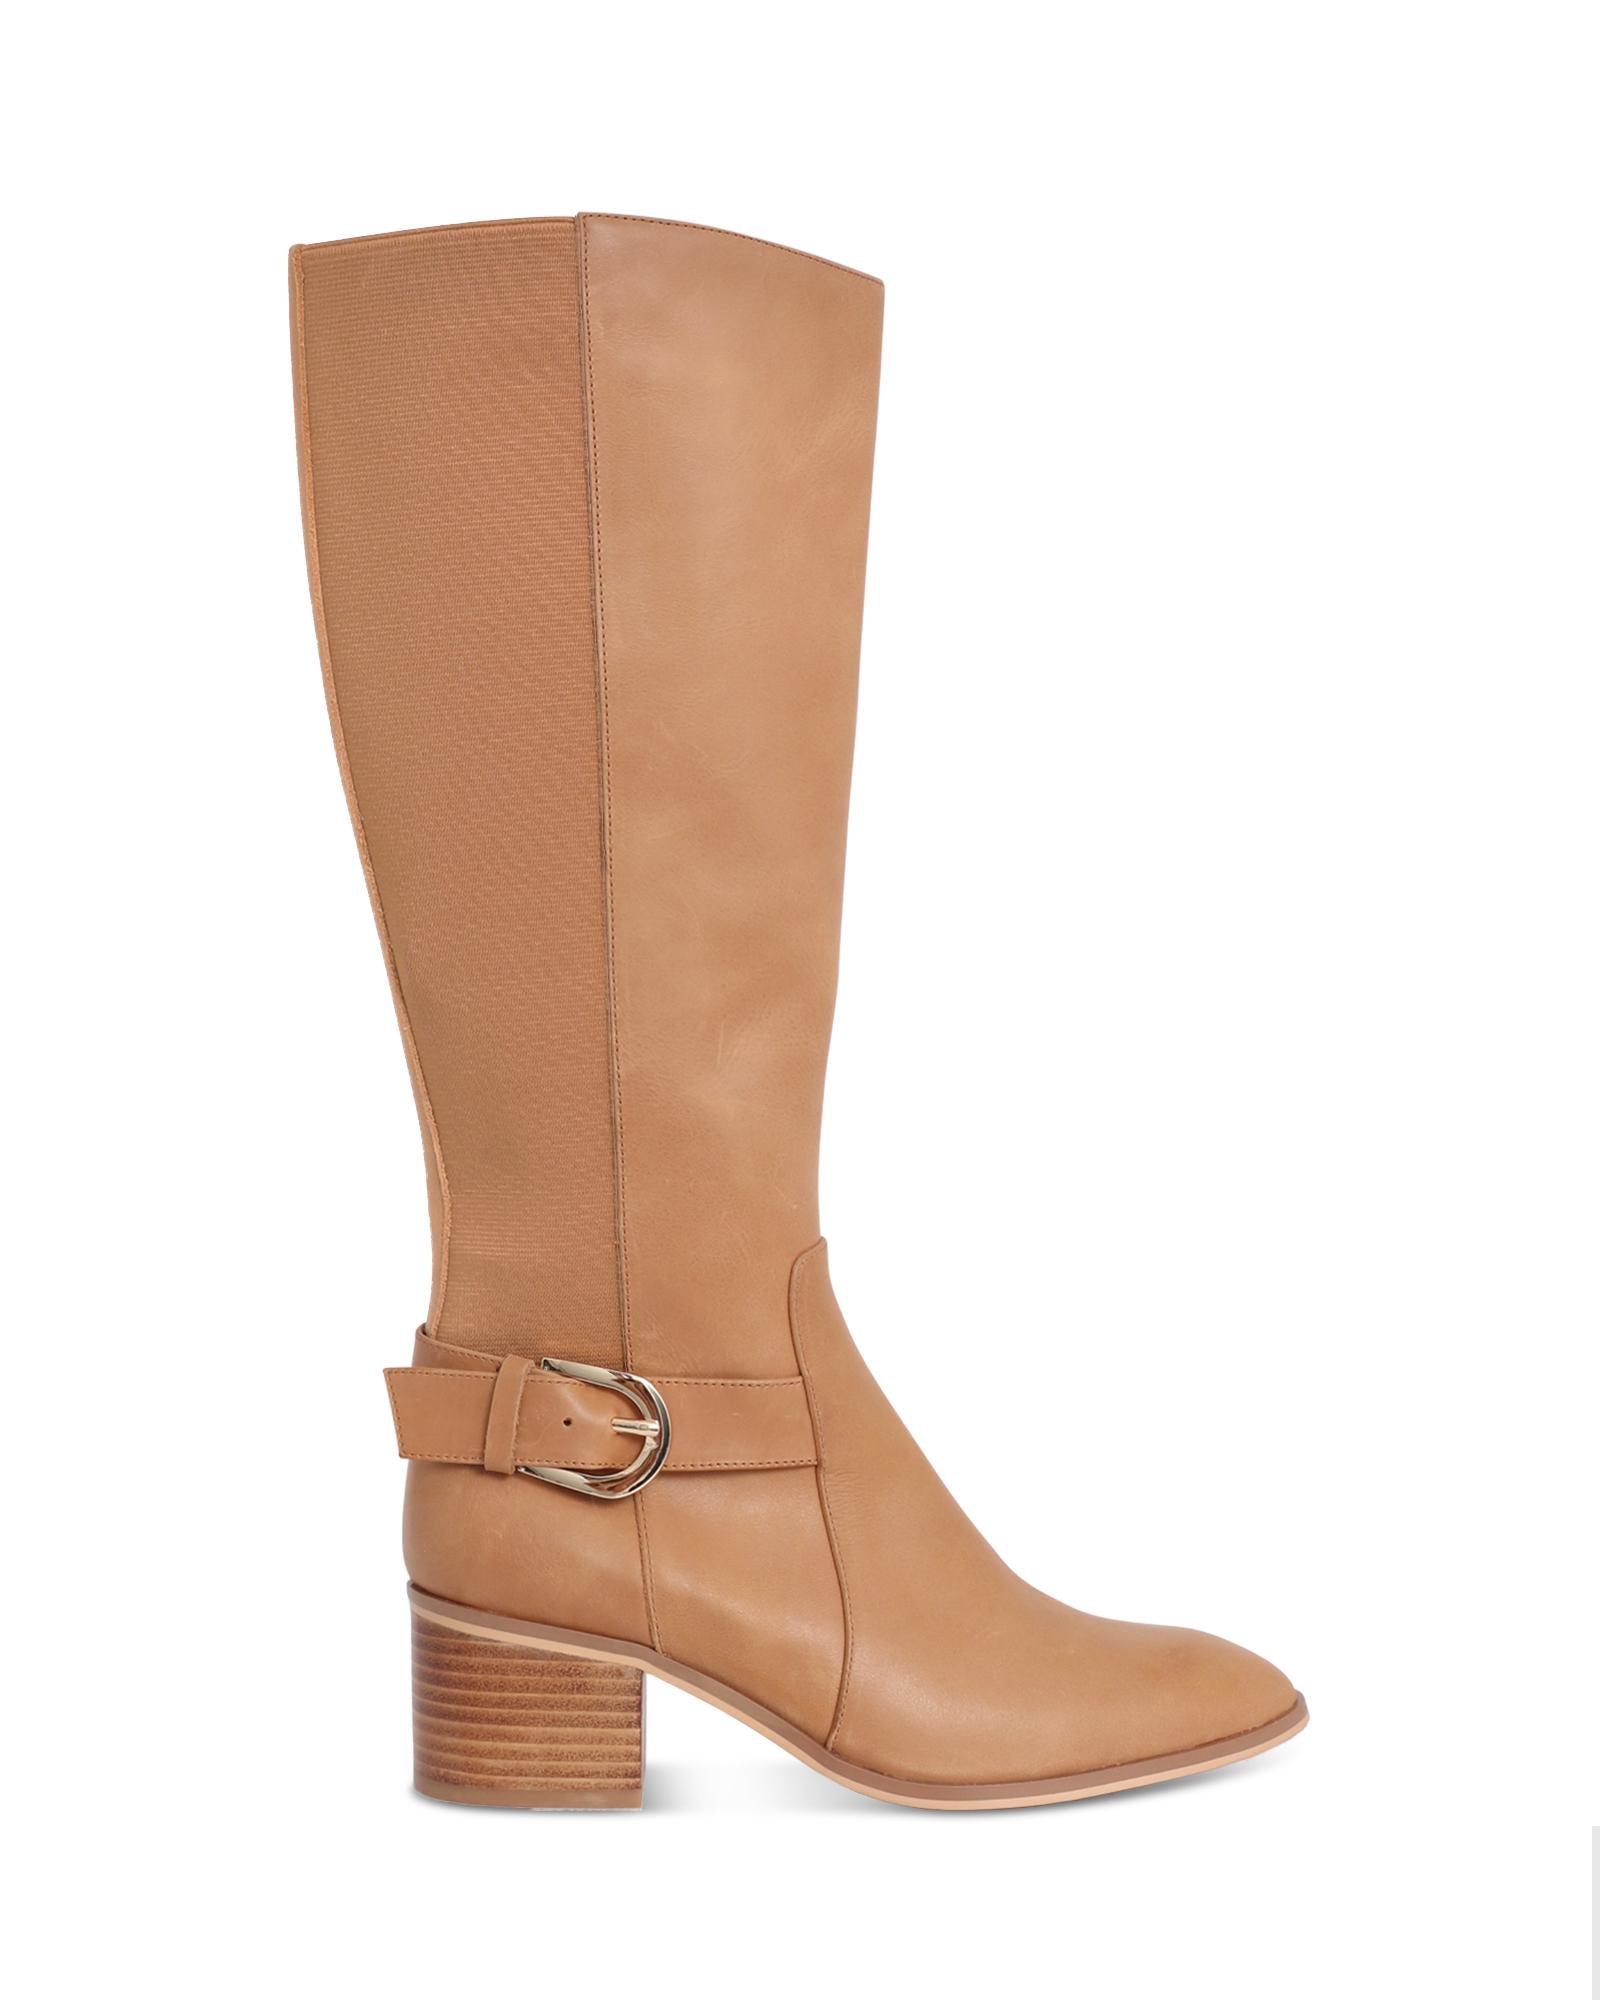 Nyla Tan 6cm Knee-High Boot with Elasticated Gusset and Gold Buckle